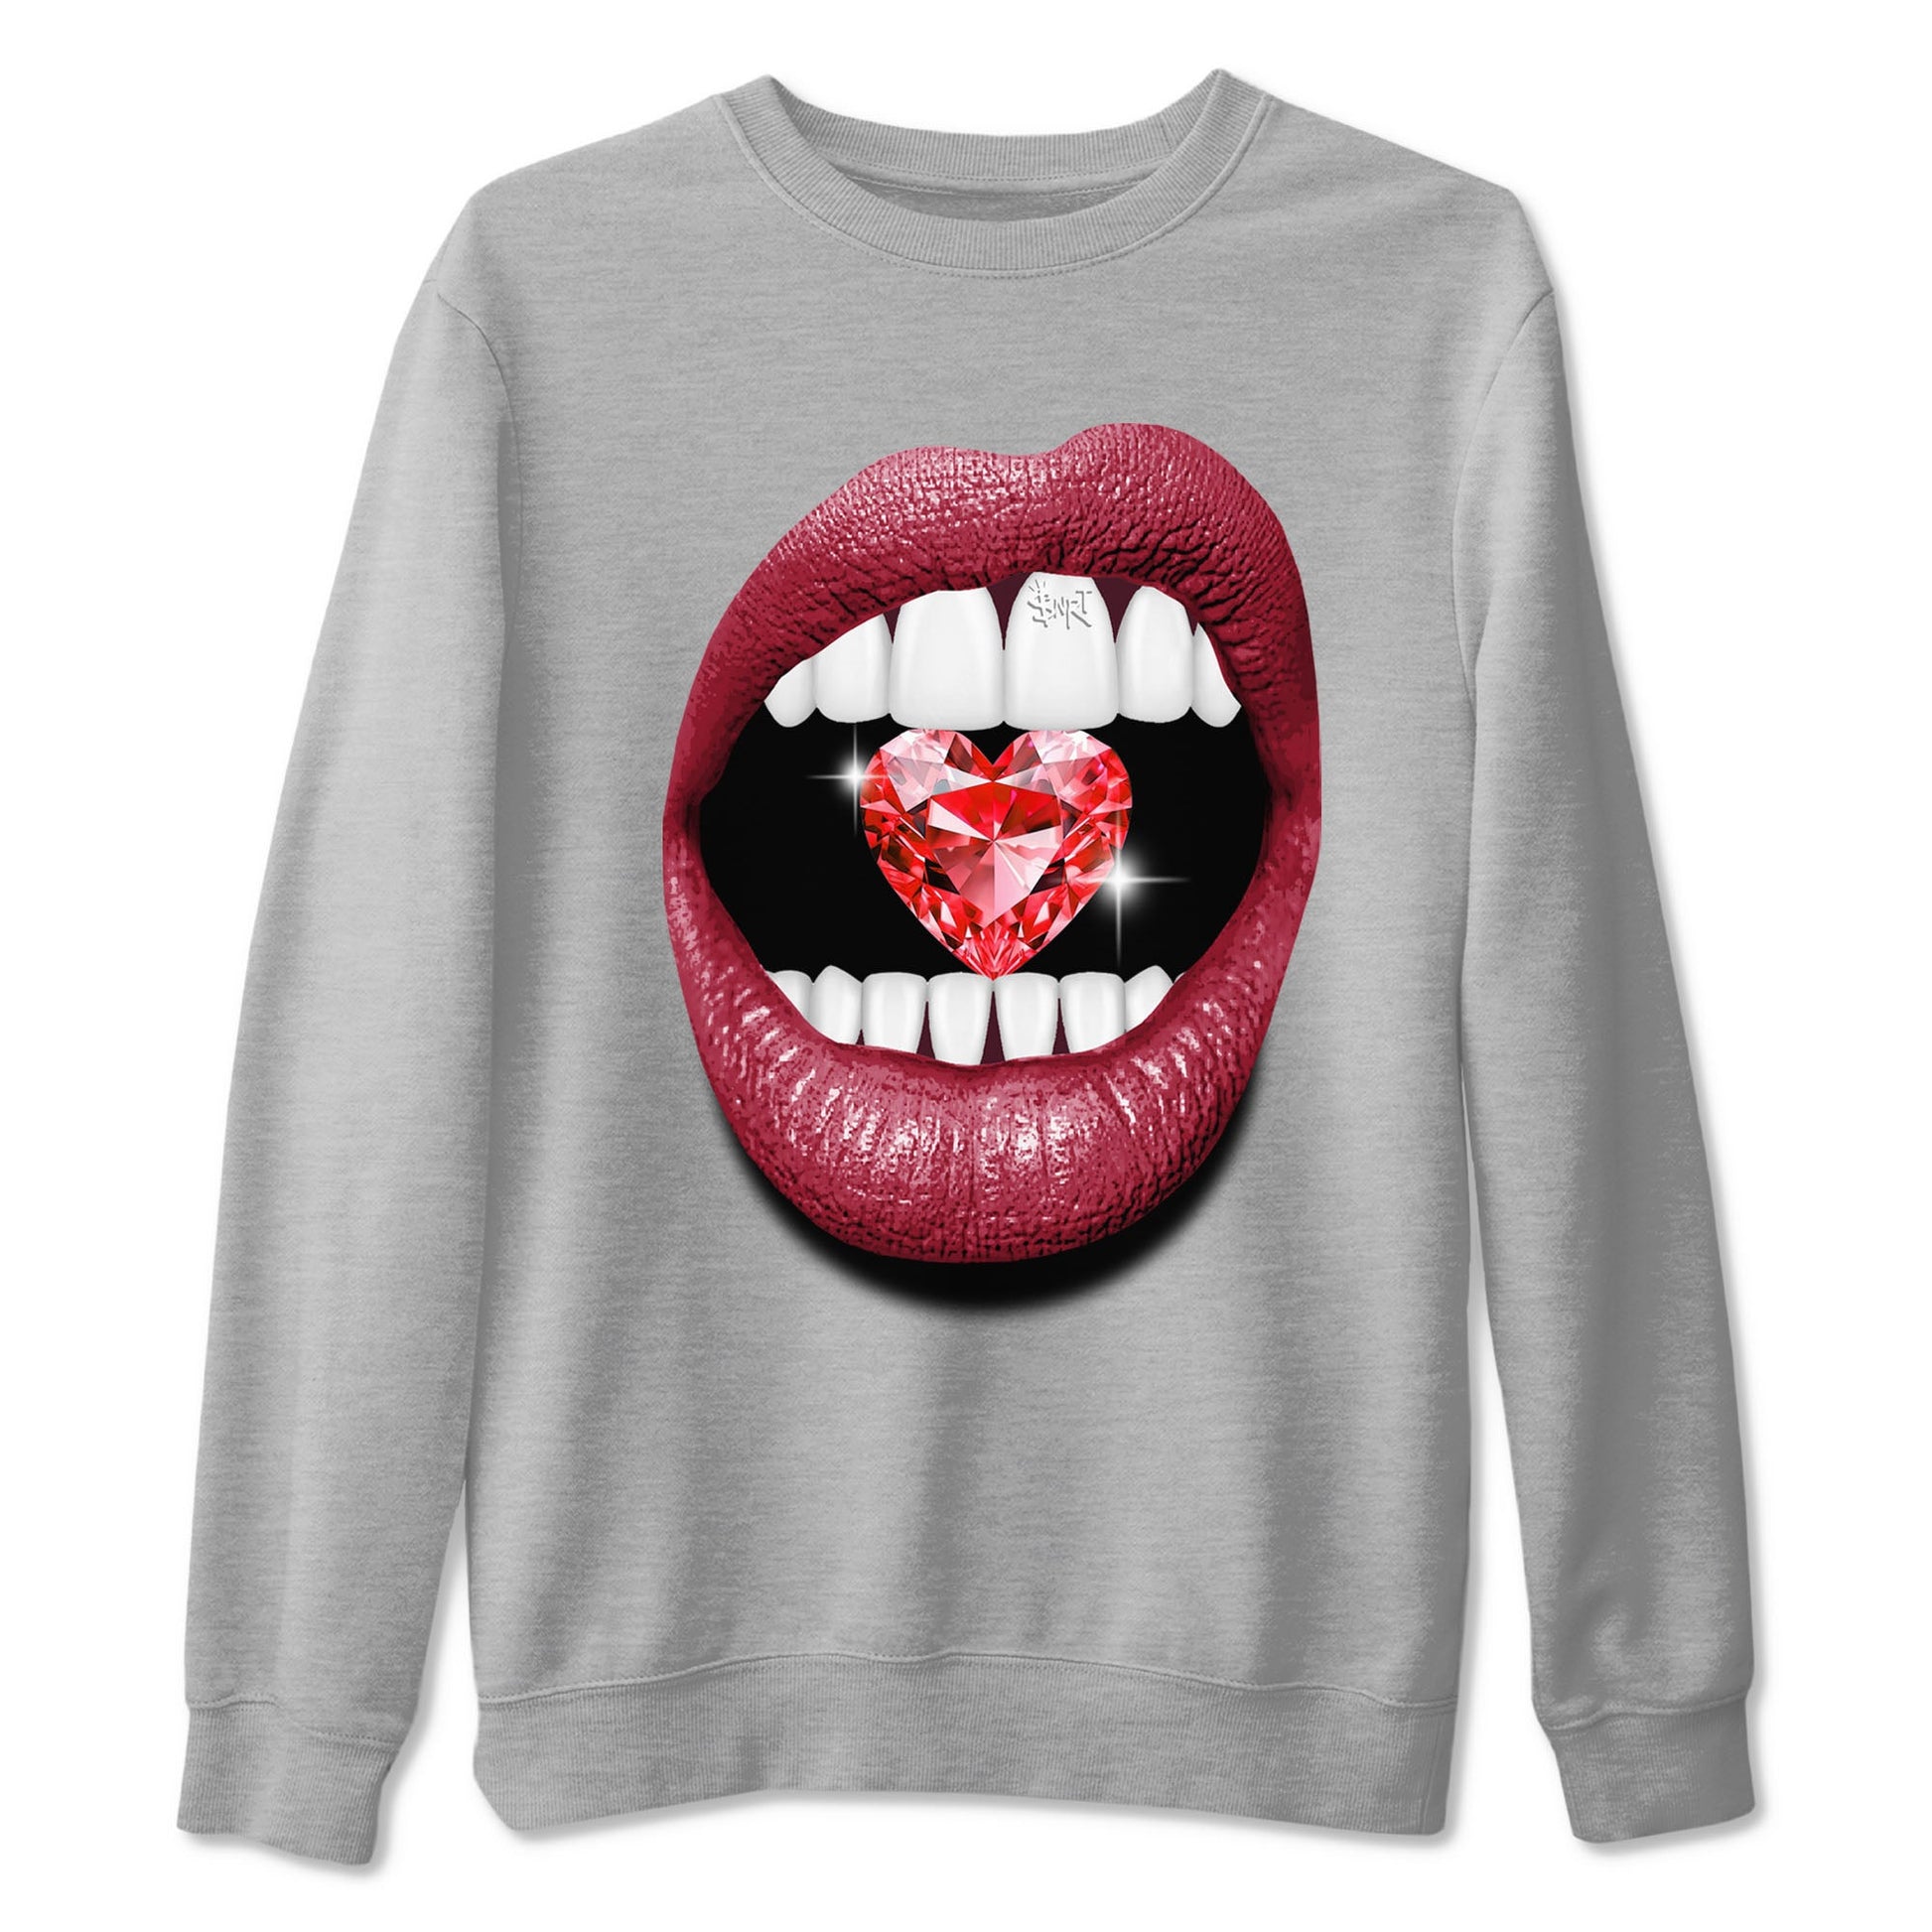 Lips Heart Diamond sneaker match tees to Special Valentine's Day street fashion brand for shirts to match Jordans SNRT Sneaker Tees Air Force 1 Valentines Day unisex t-shirt Heather Grey 2 unisex shirt